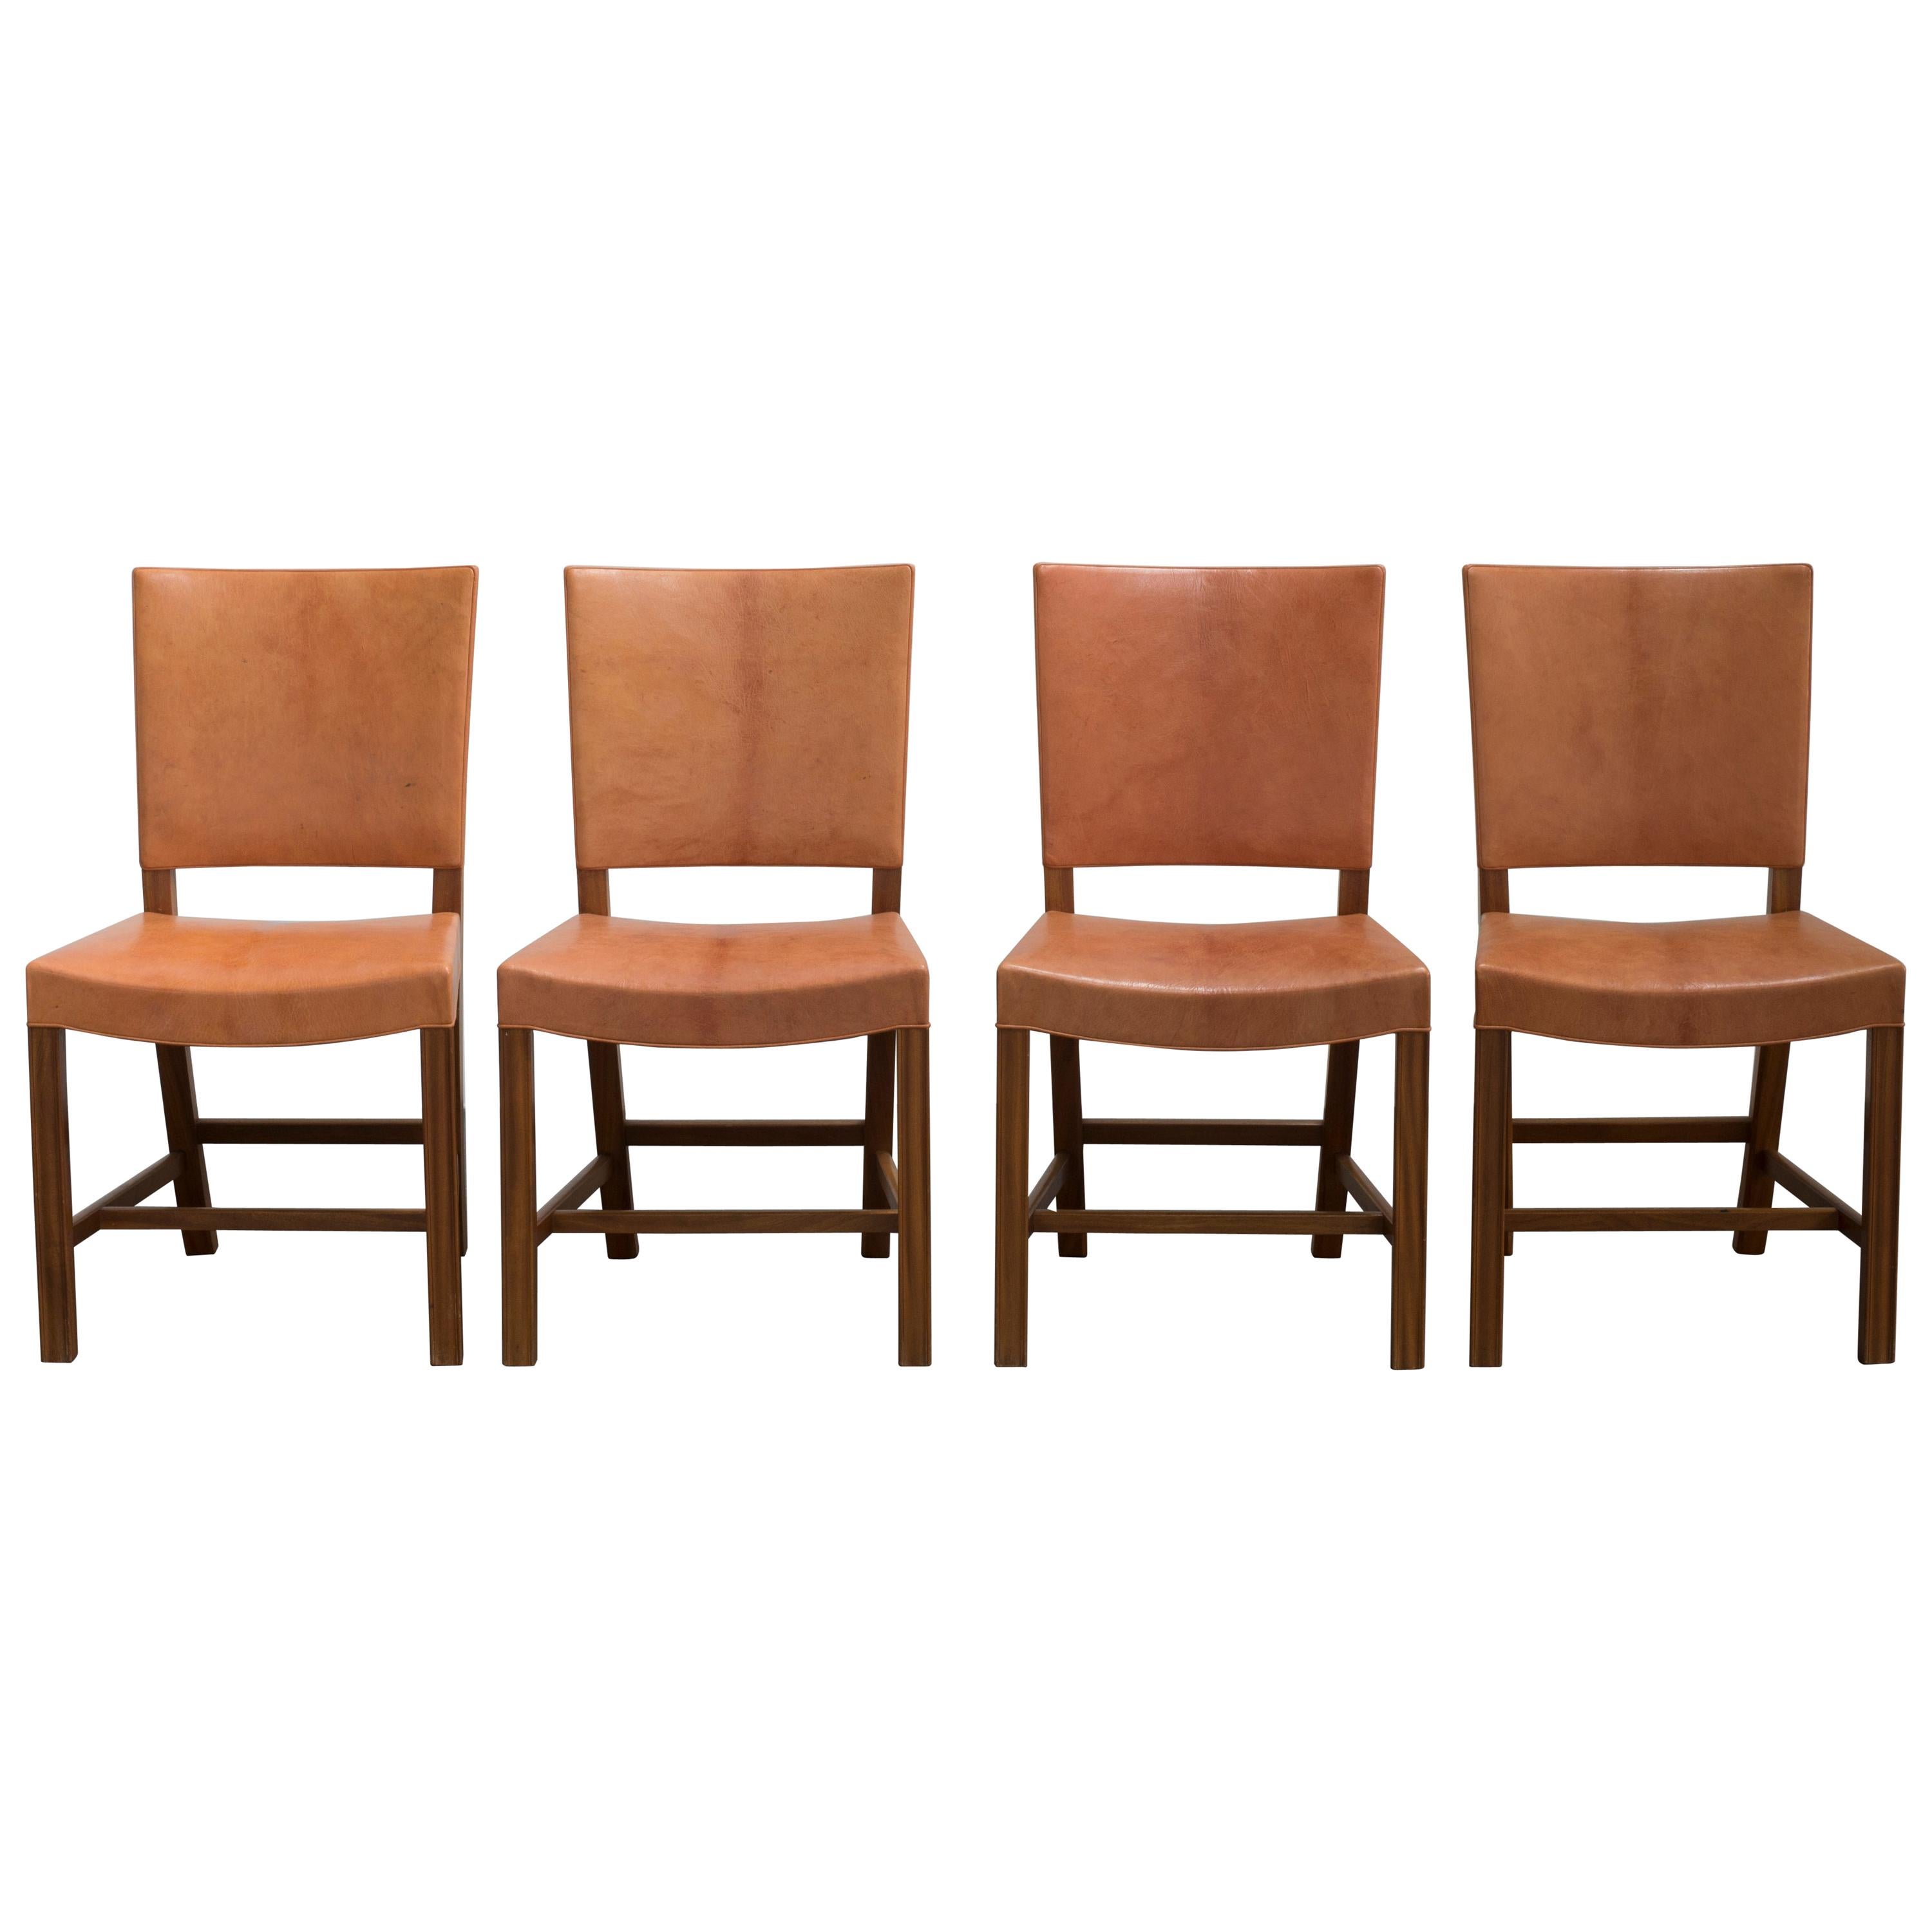 Kaare Klint Set of Four Red Chairs for Rud. Rasmussen